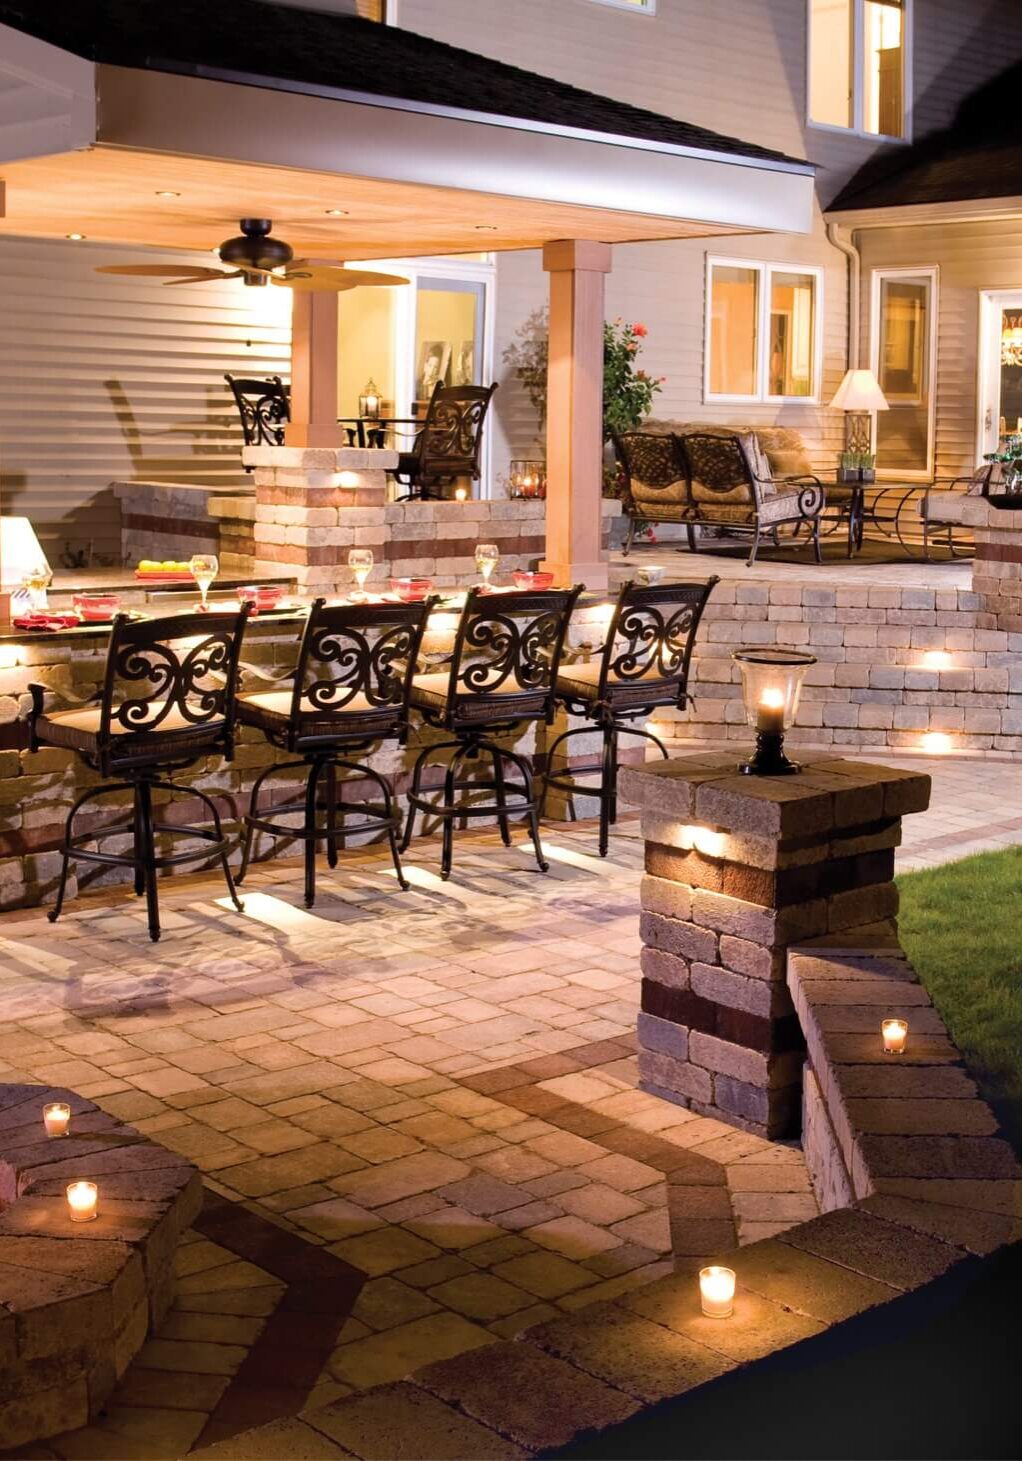 St. Charles, IL Outdoor Living Space